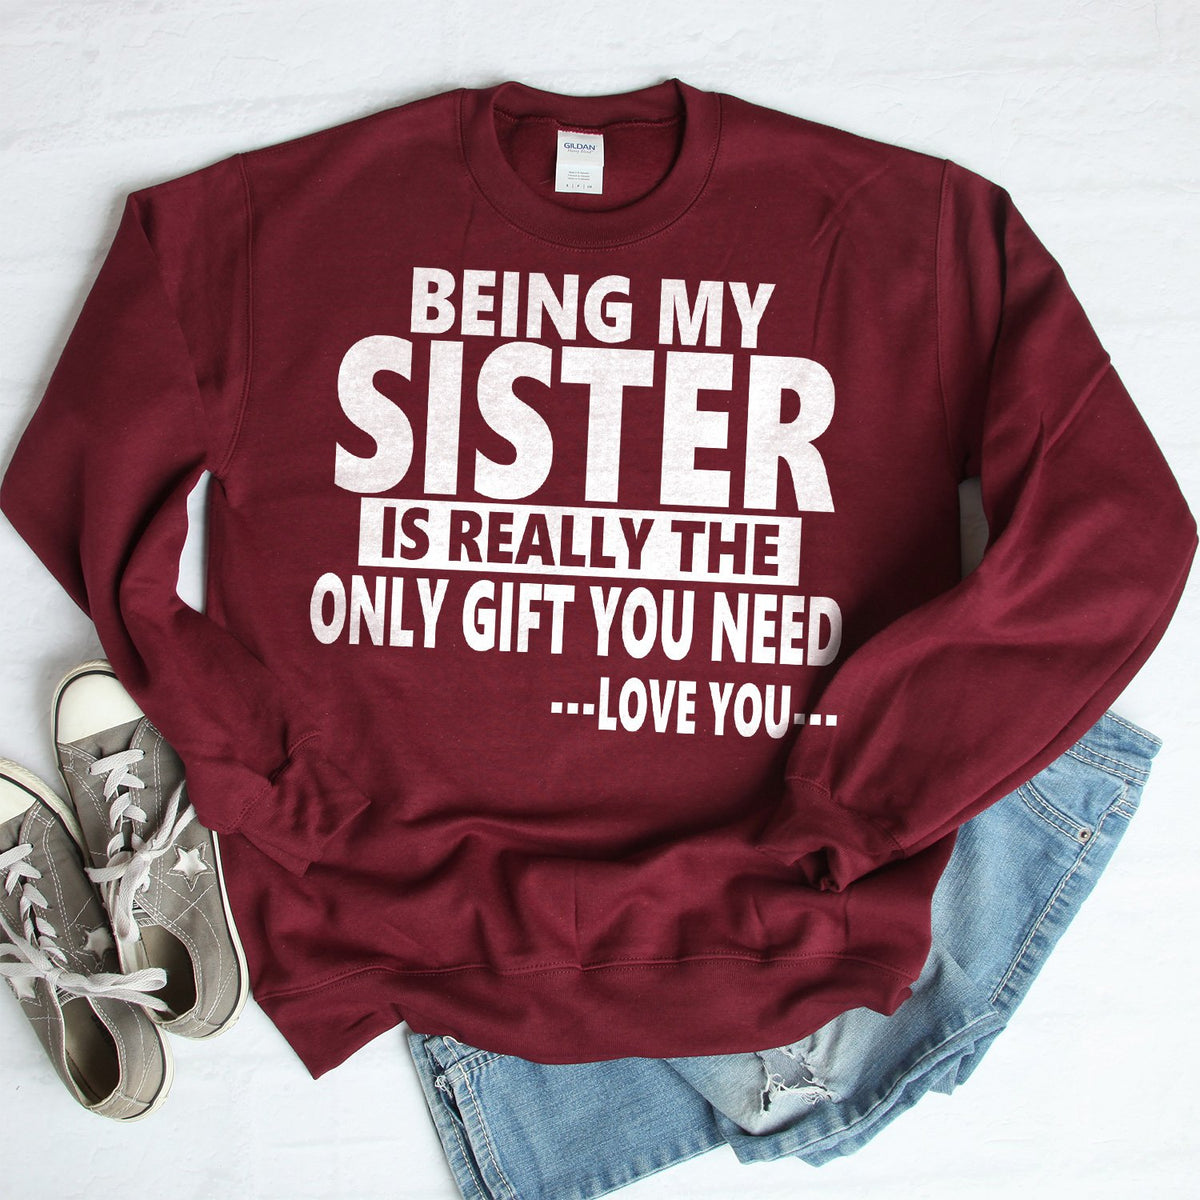 Being My Sister is Really The Only Gift You Need...Love You... - Long Sleeve Heavy Crewneck Sweatshirt